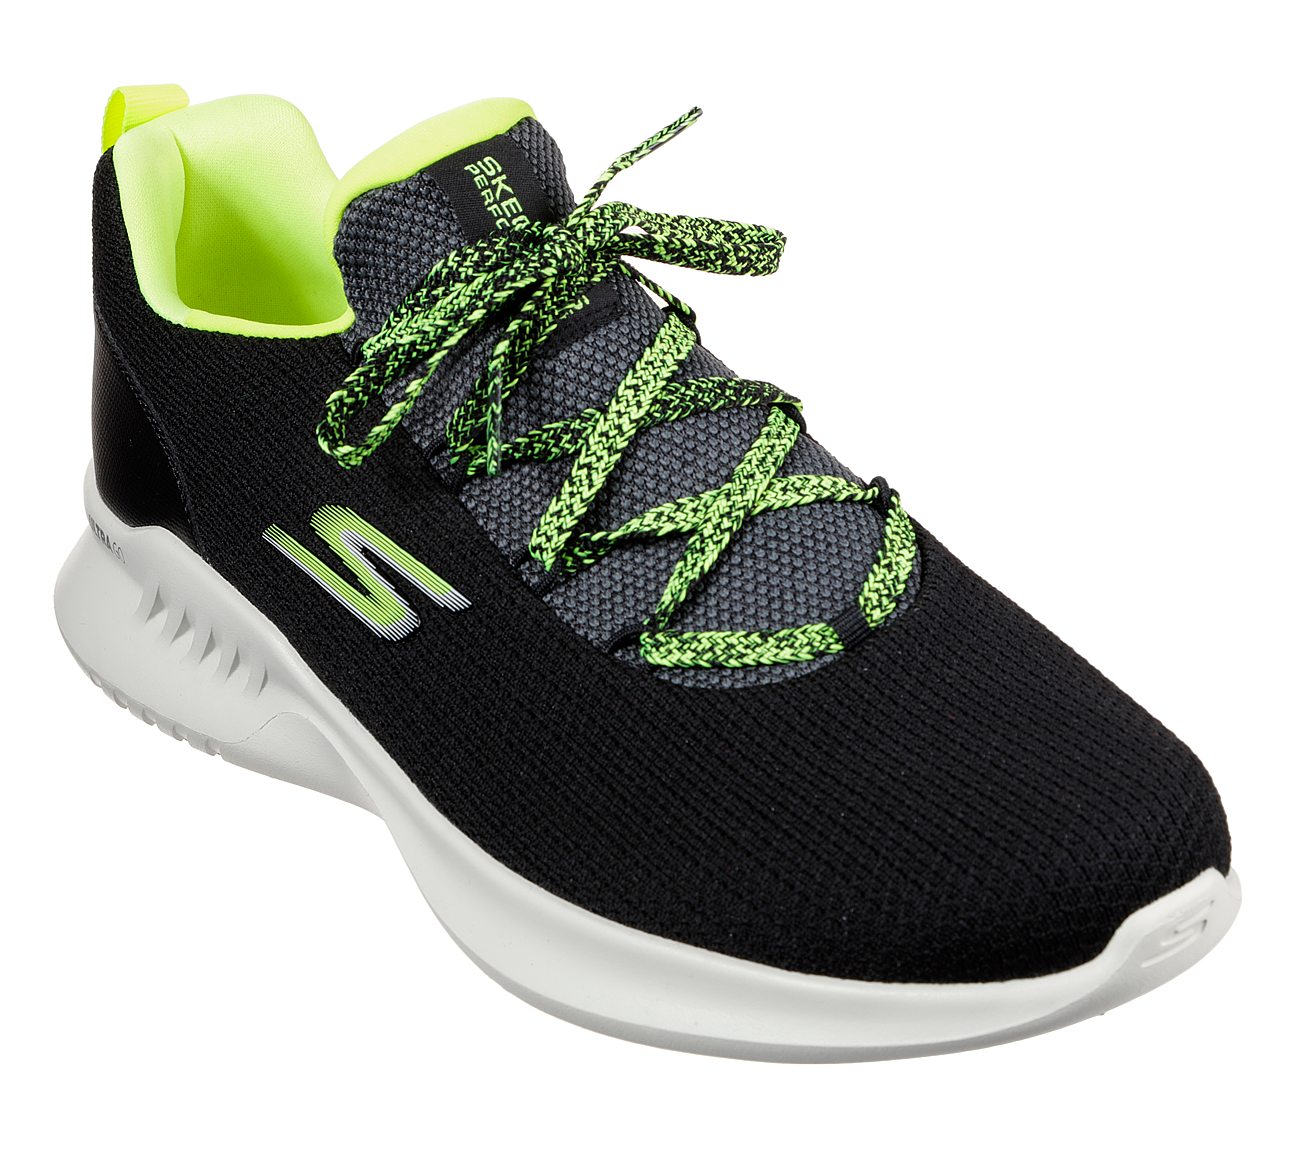 GO RUN MOJO 2.0 - LUCITE, BLACK/LIME Footwear Lateral View